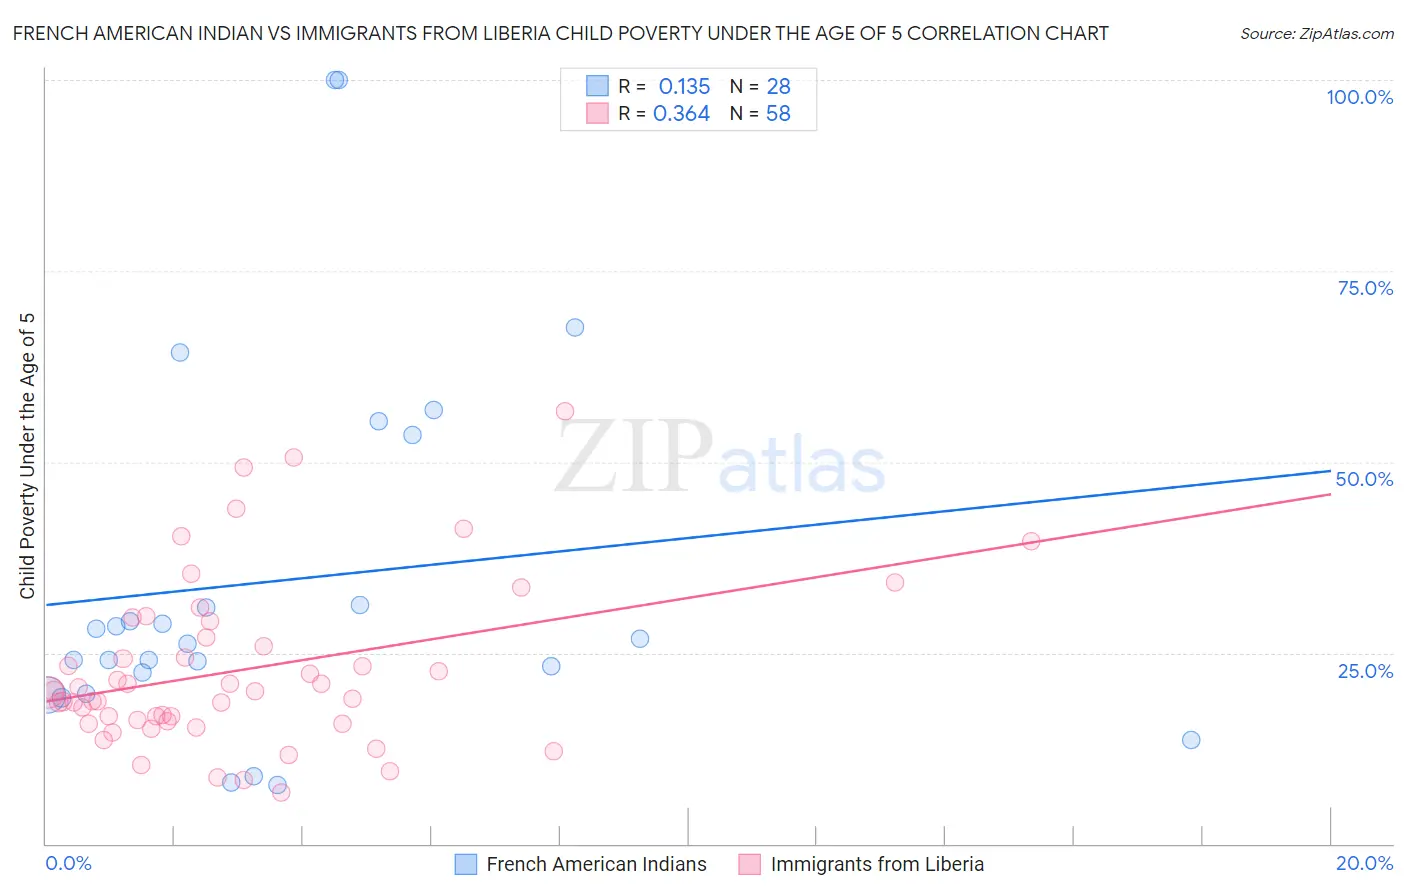 French American Indian vs Immigrants from Liberia Child Poverty Under the Age of 5